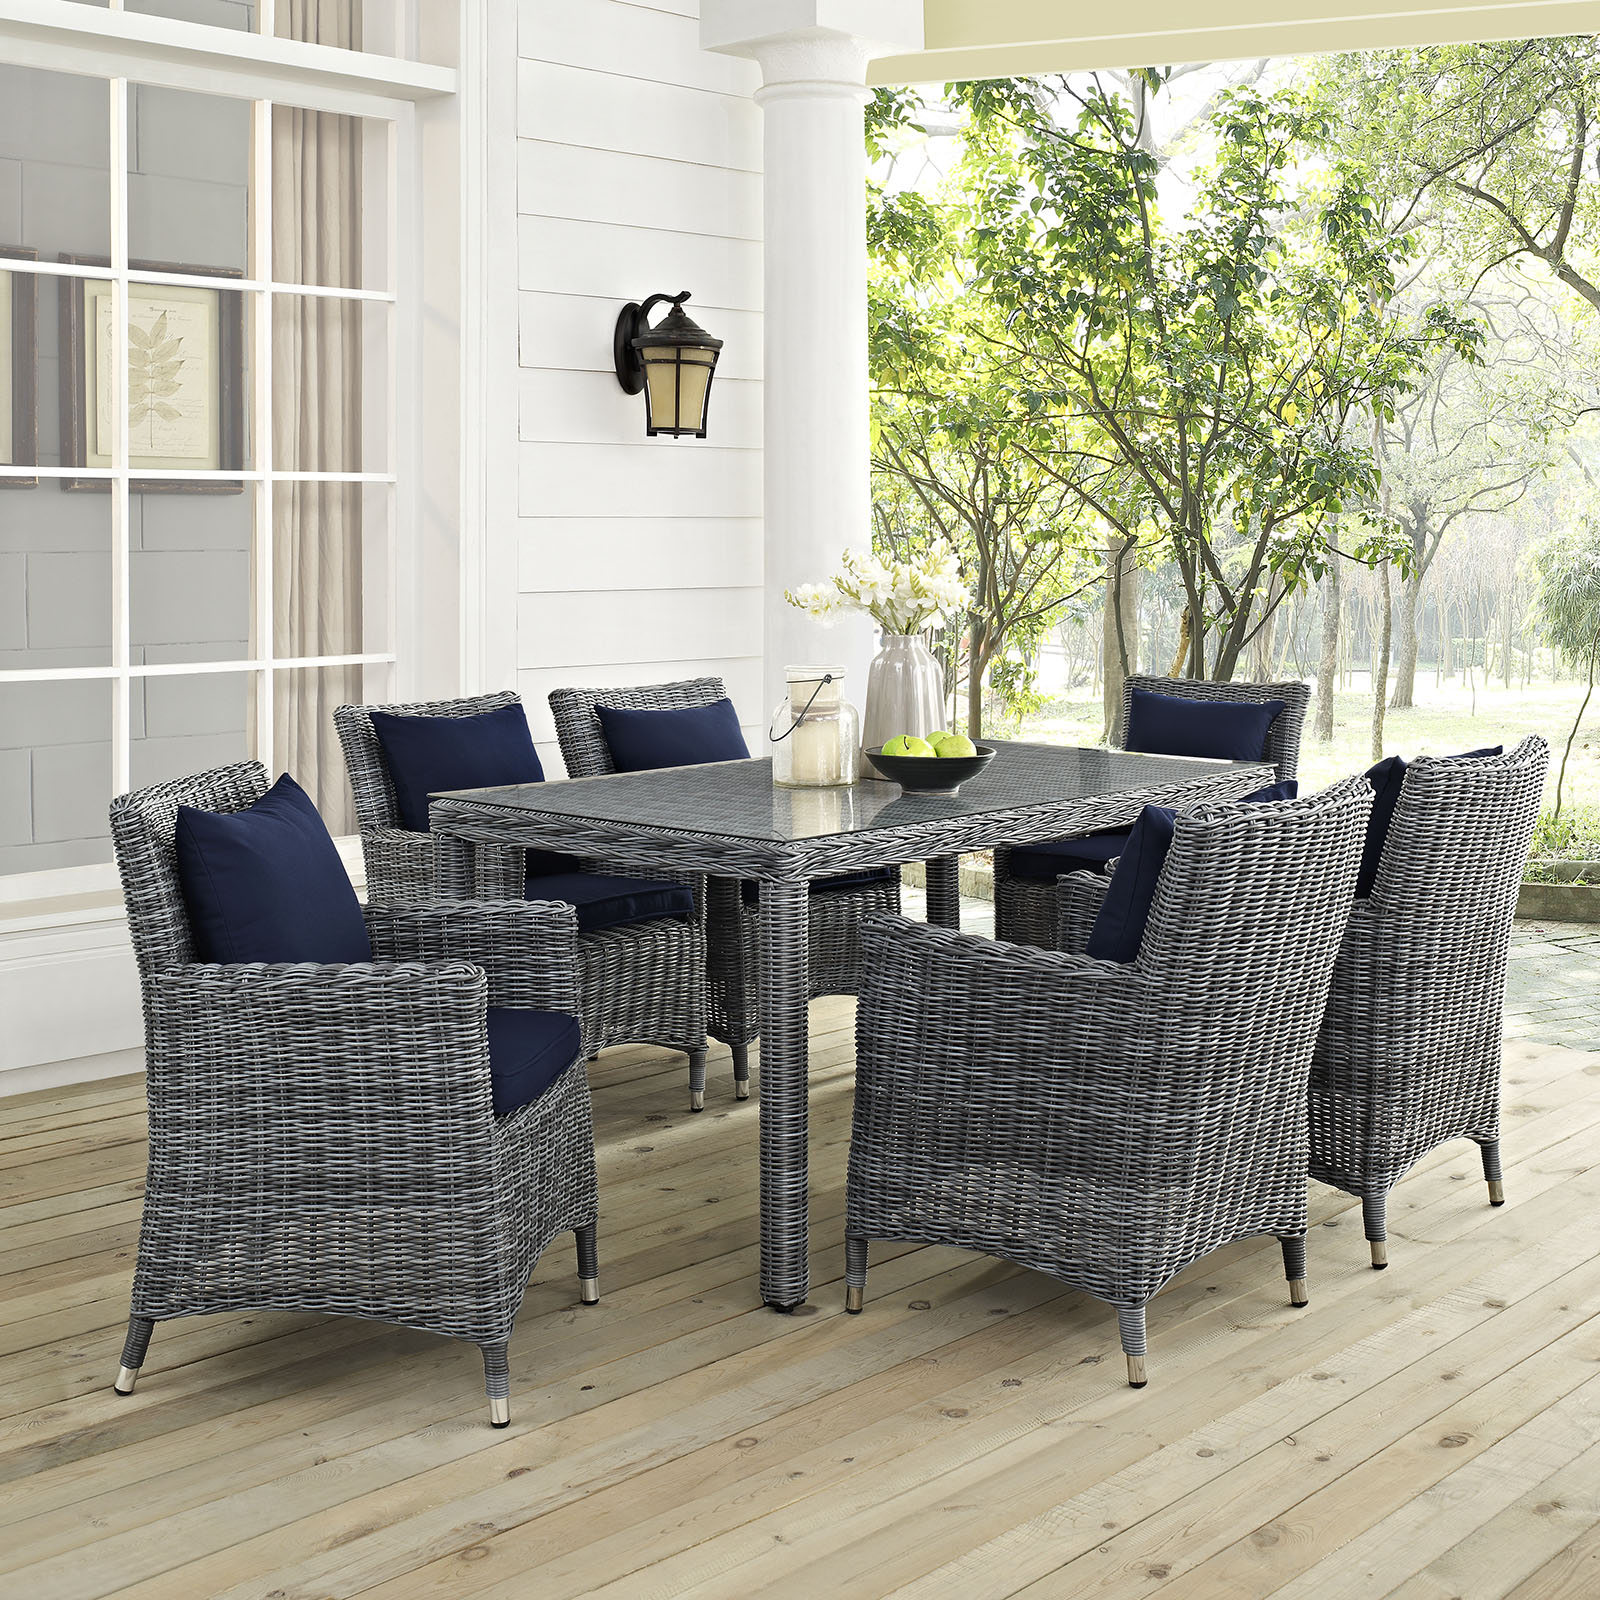 Modern Contemporary Urban Design Outdoor Patio Balcony Seven PCS Dining Chairs and Table Set, Navy Blue, Rattan - image 2 of 7